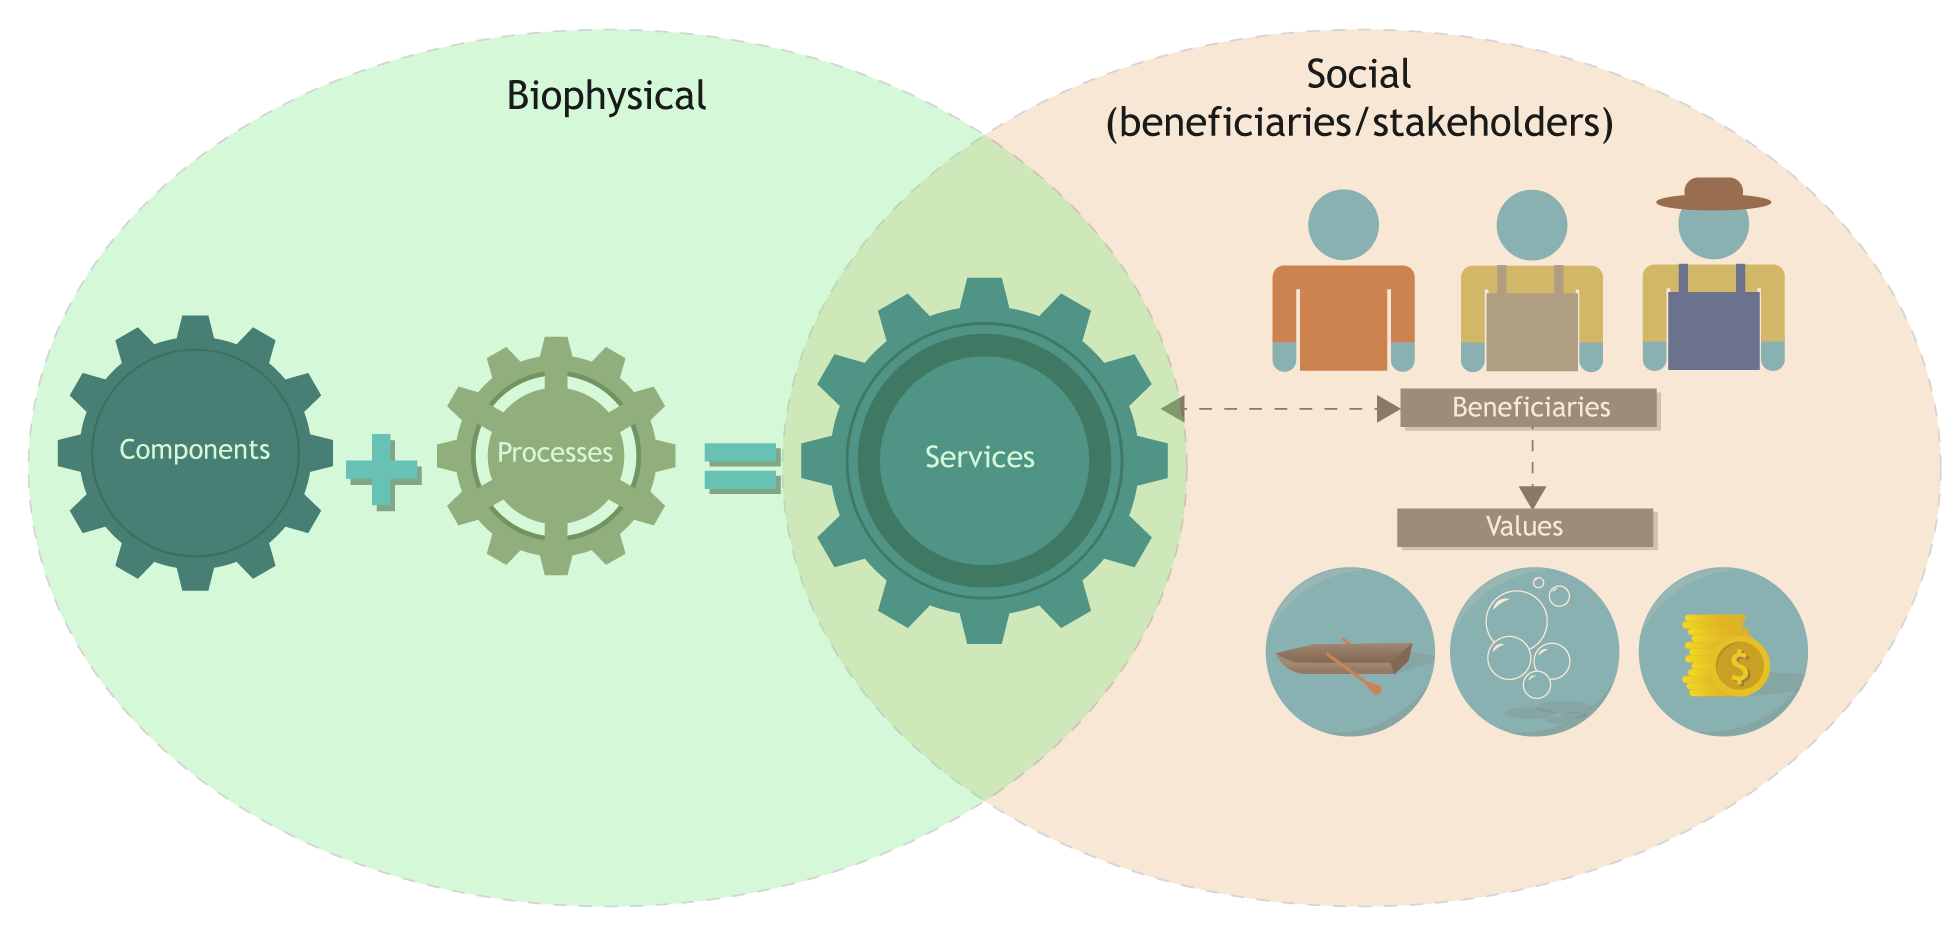 A simplified diagram of how social, cultural and economic values are formed in social-ecological systems. Adapted from Landers and Nahlik (2013), Scholte et al. (2015) and Haines-Young and Potschin (2018). 